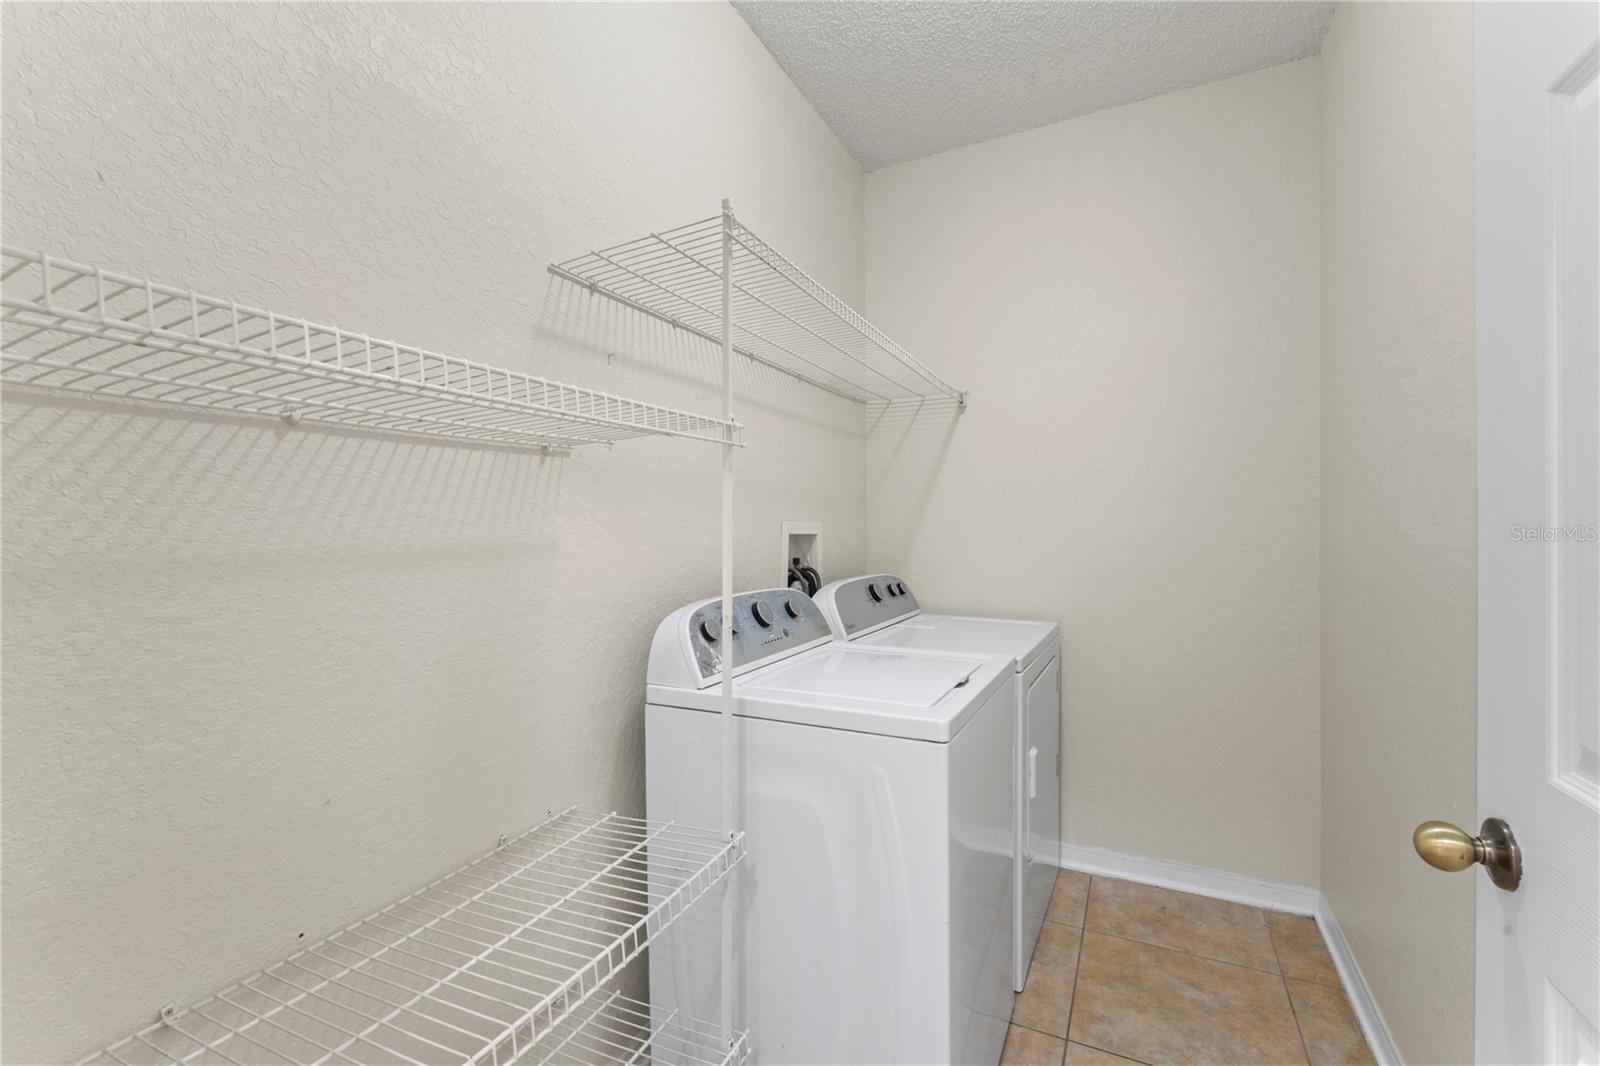 Laundry Room with Lots of Storage Space